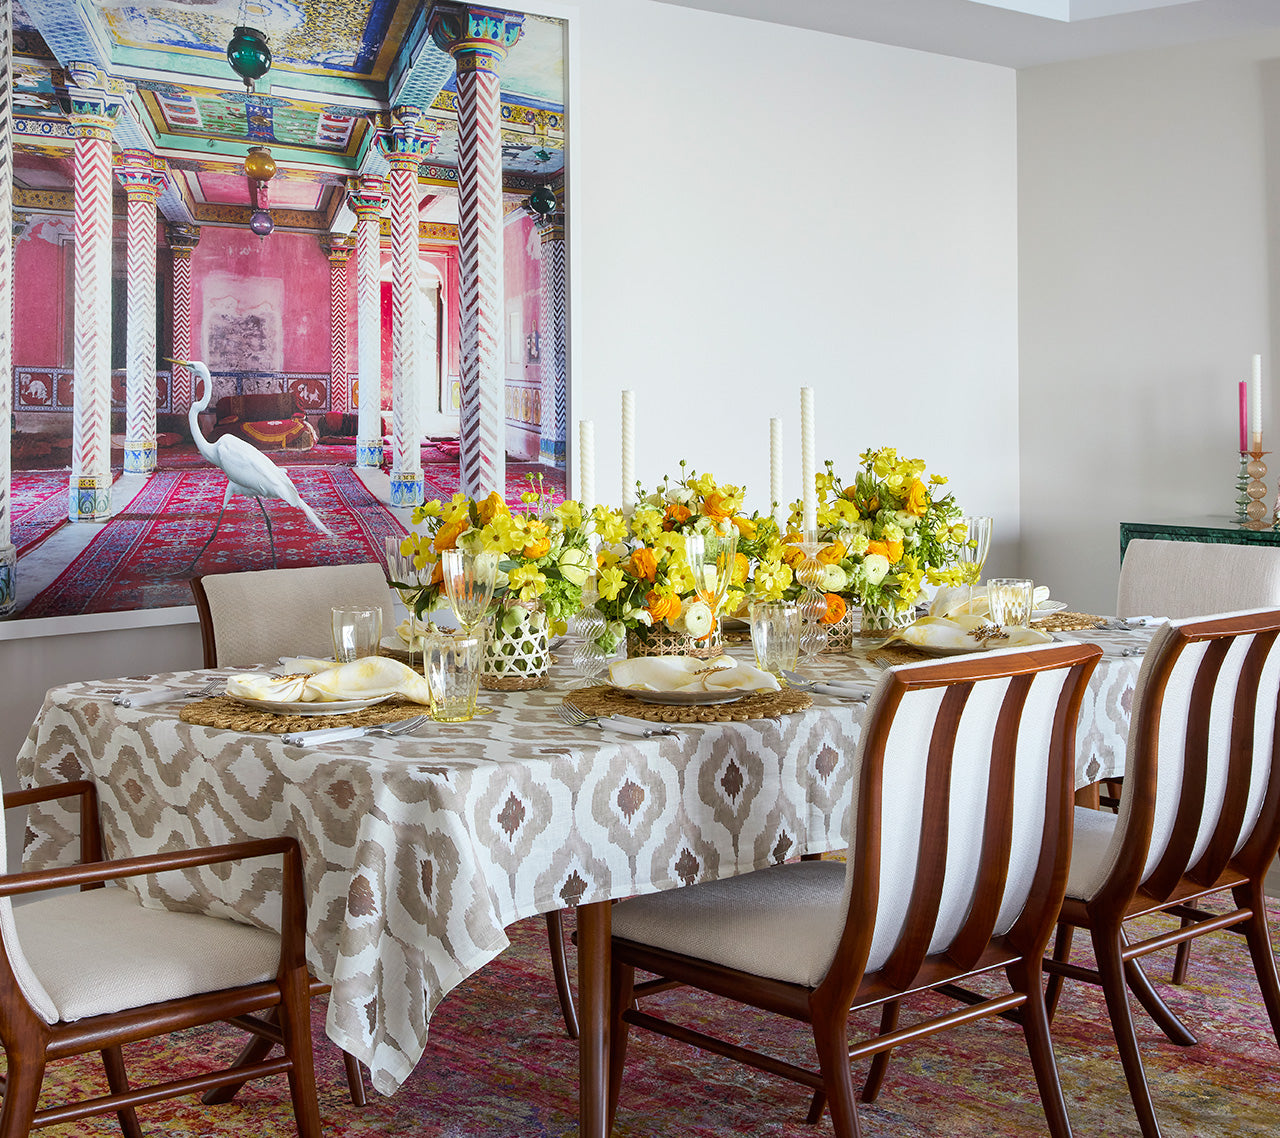 Watercolor Ikat Tablecloth in taupe with a pattern inspired by the Indonesian textile making process, Ikat